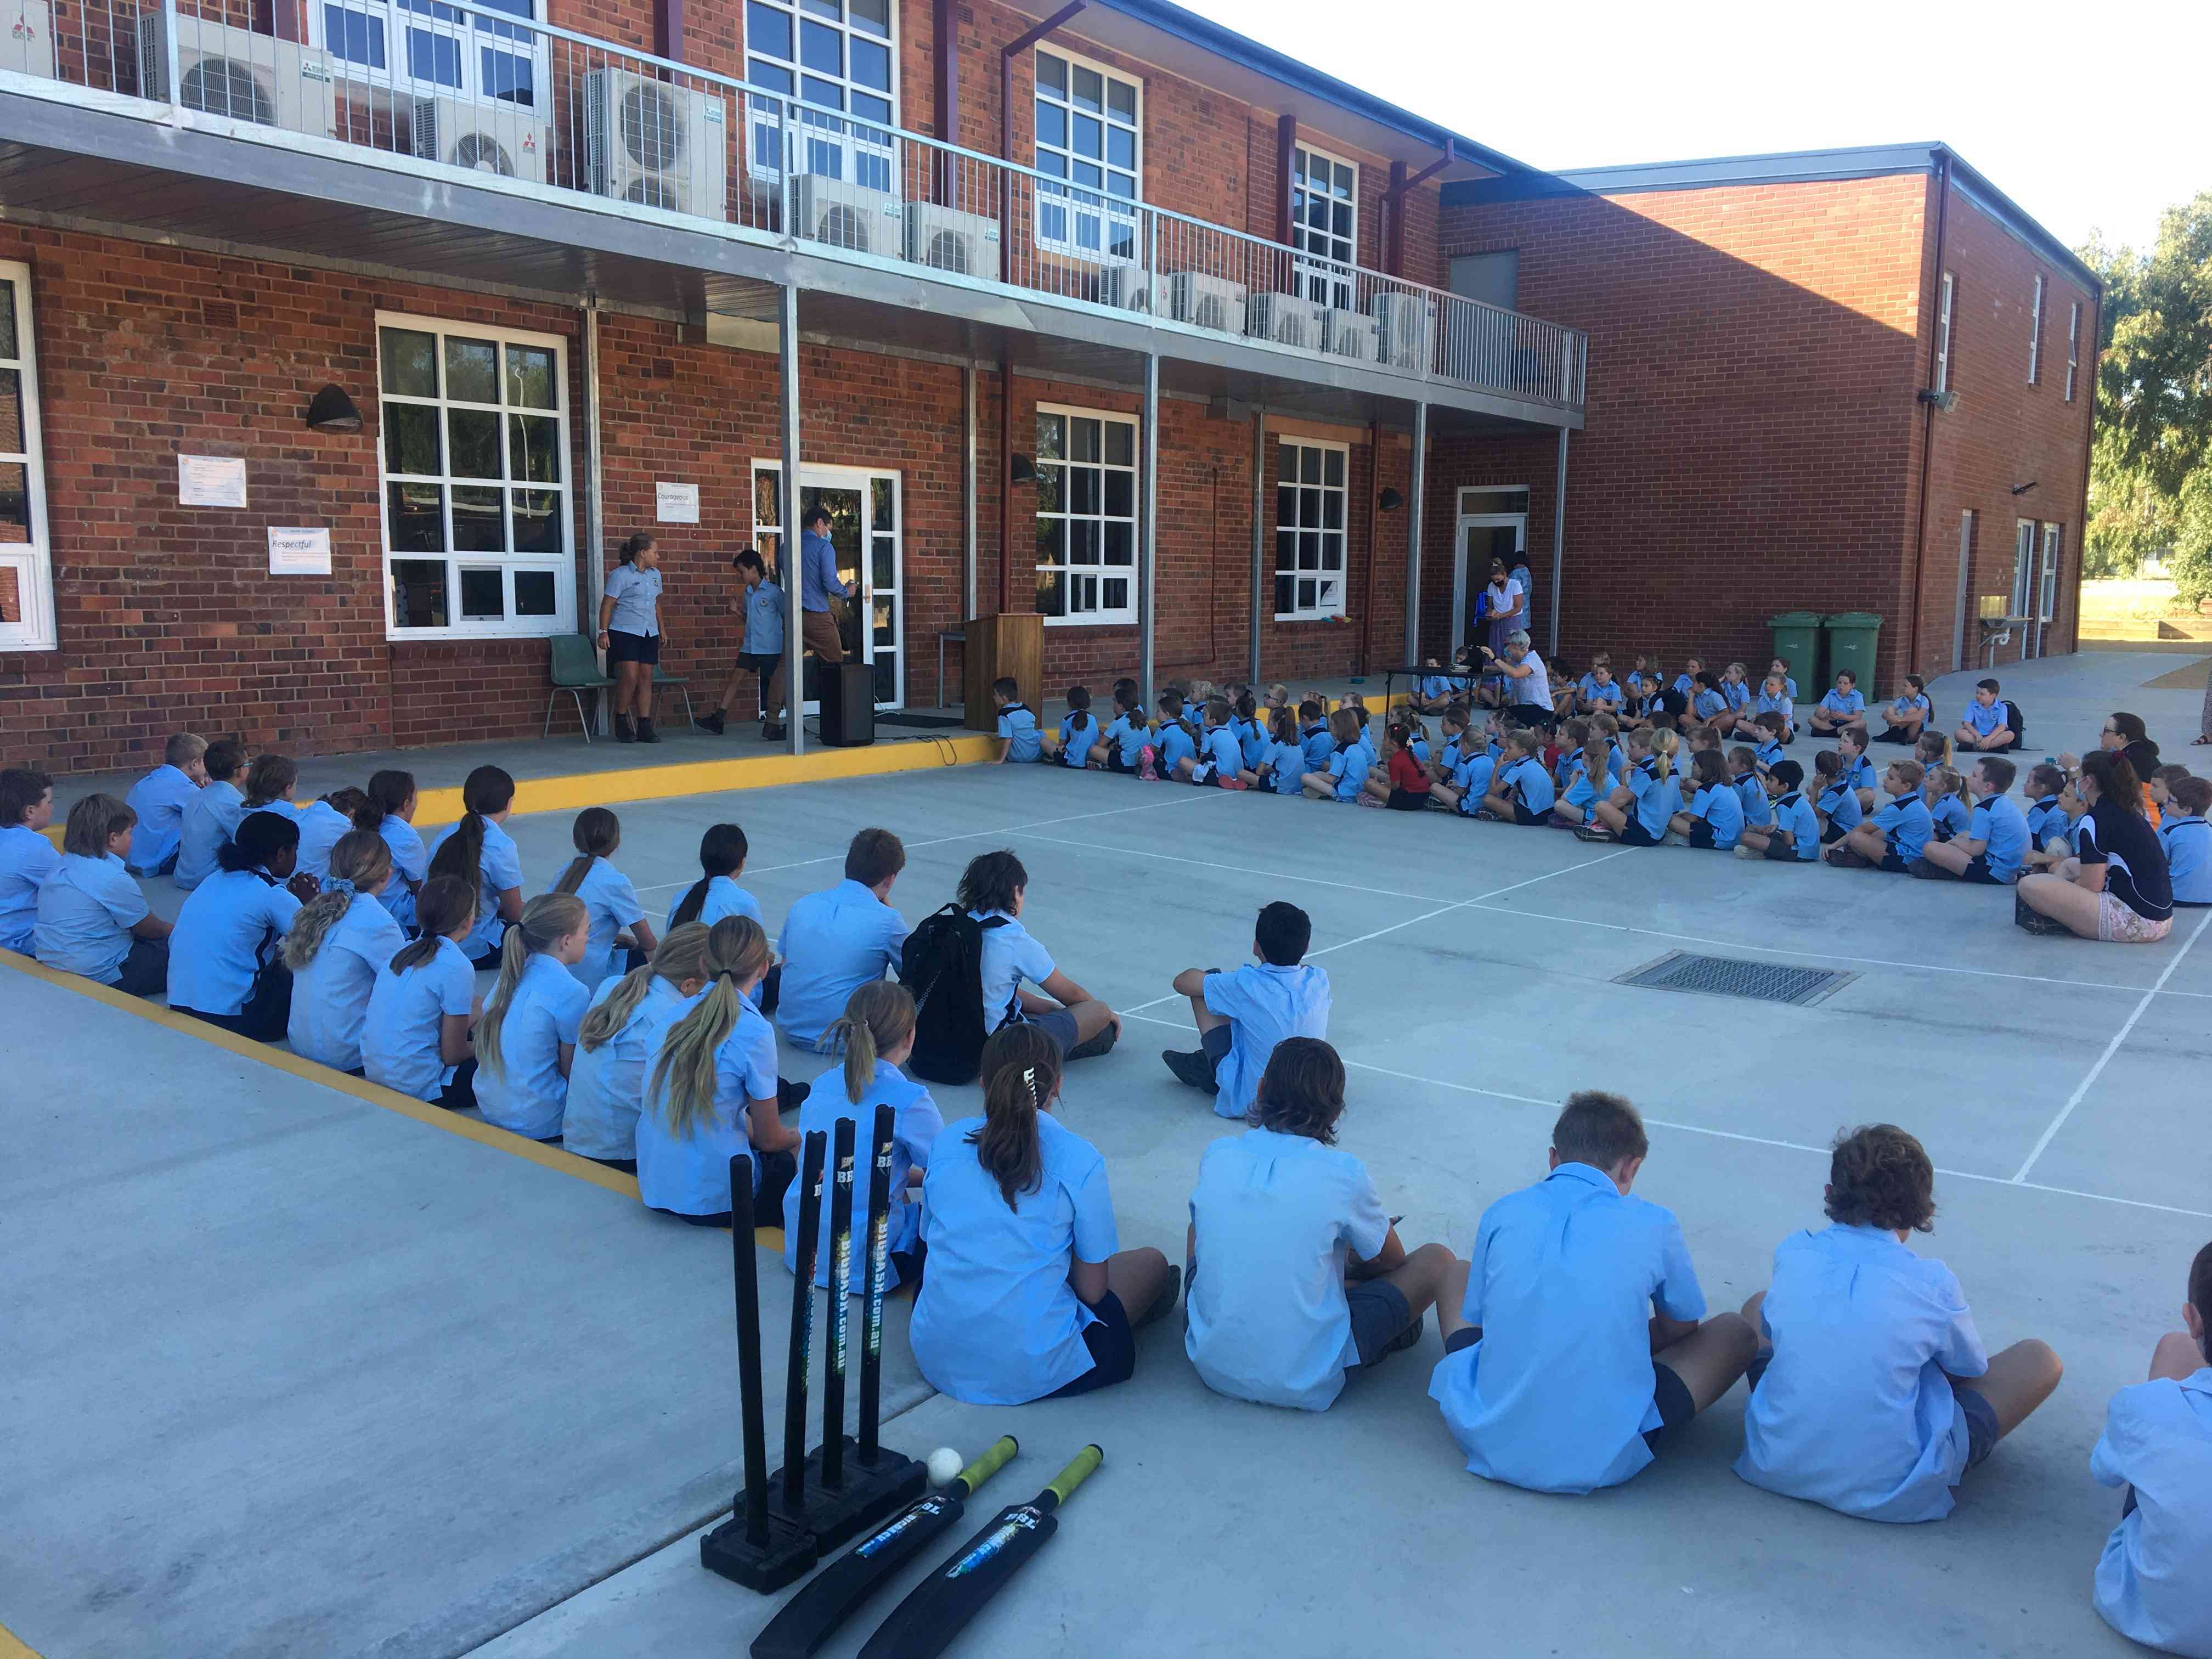 Outdoor Assembly in action